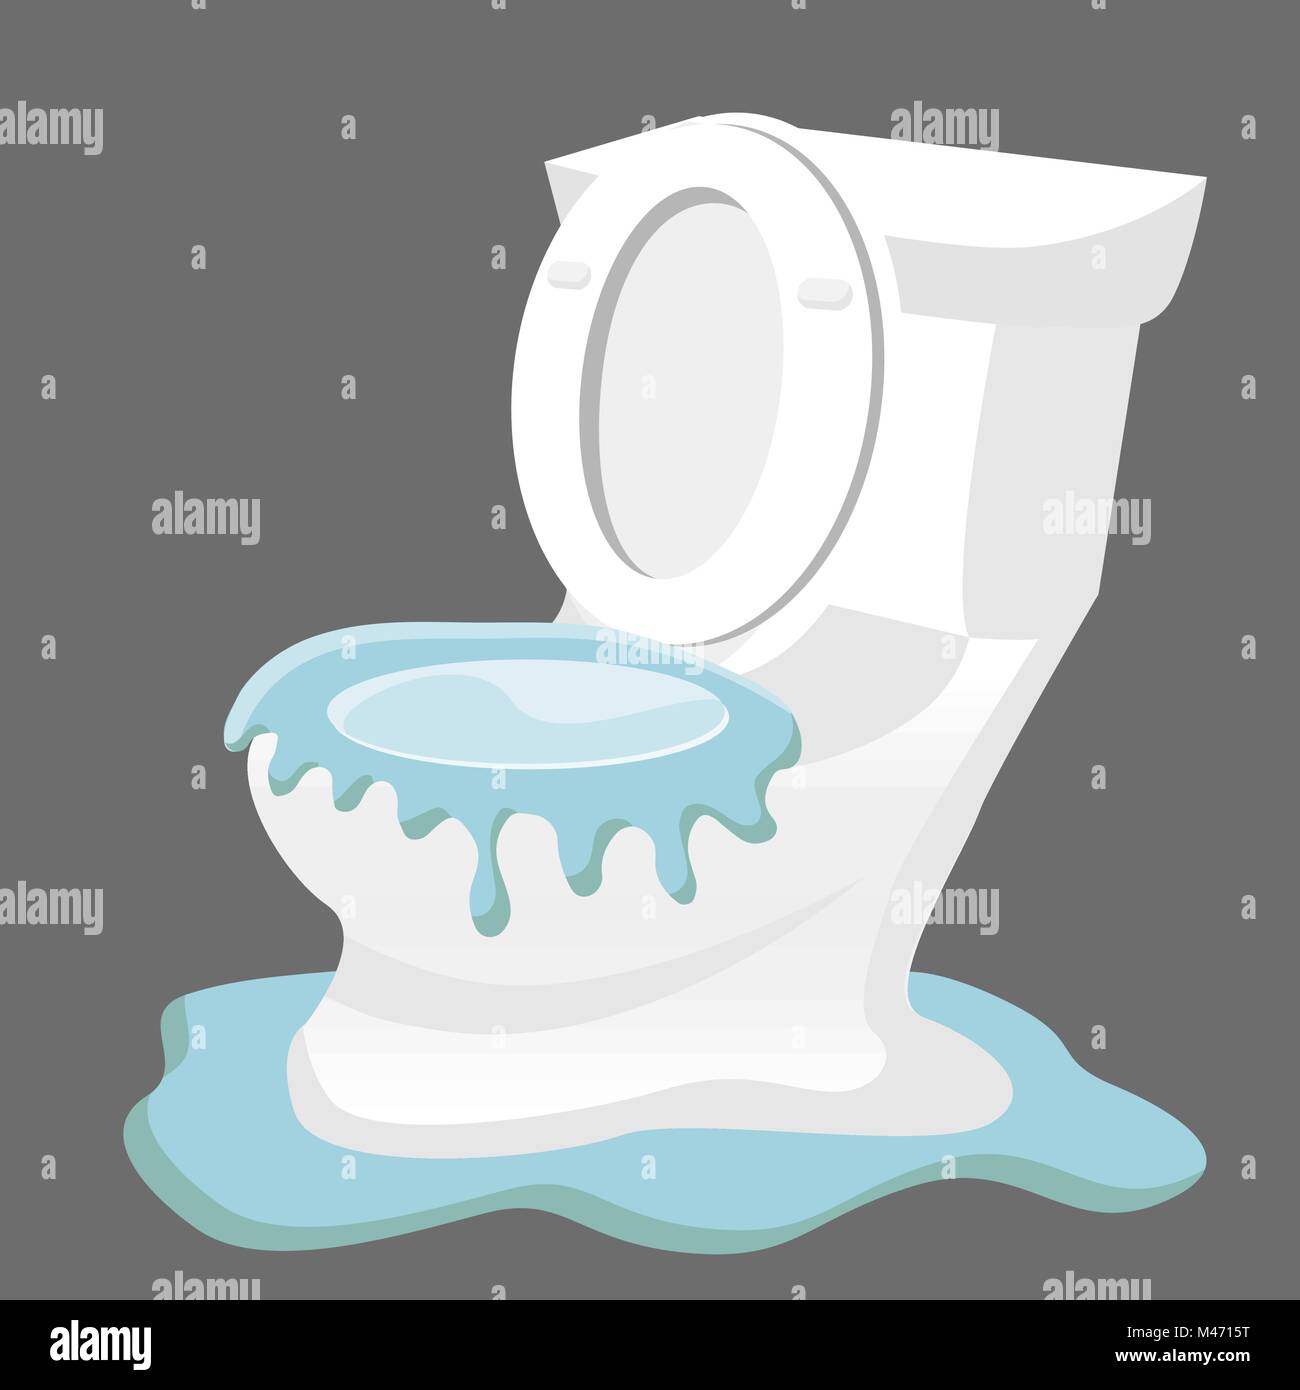 An image of a broken toilet clogged and backing up overflowing. Stock Vector